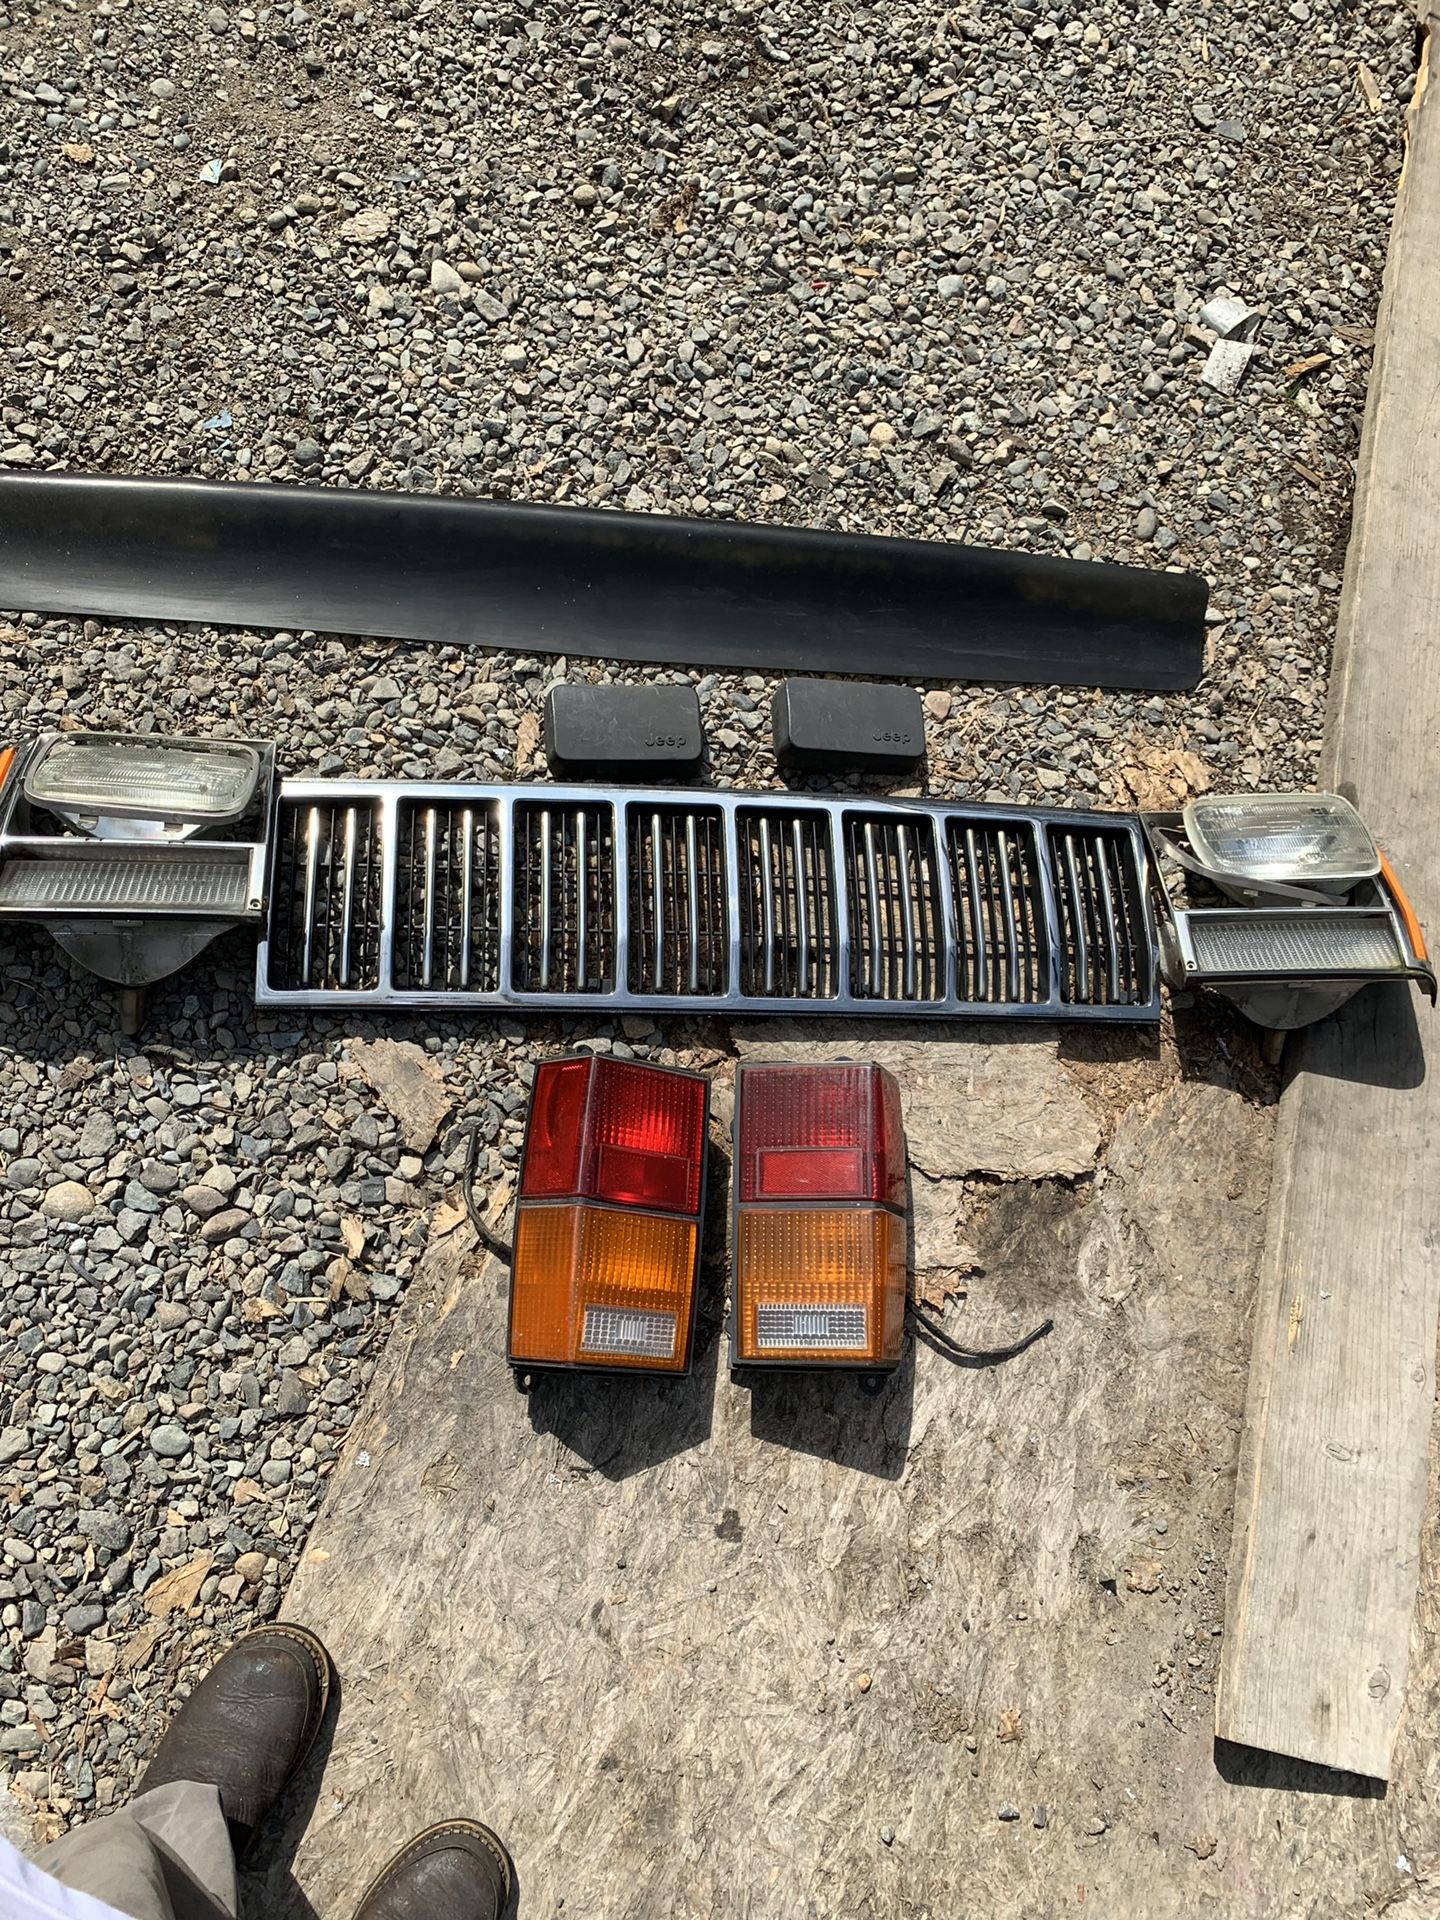 Jeep Cherokee 1990 front parts and back parts